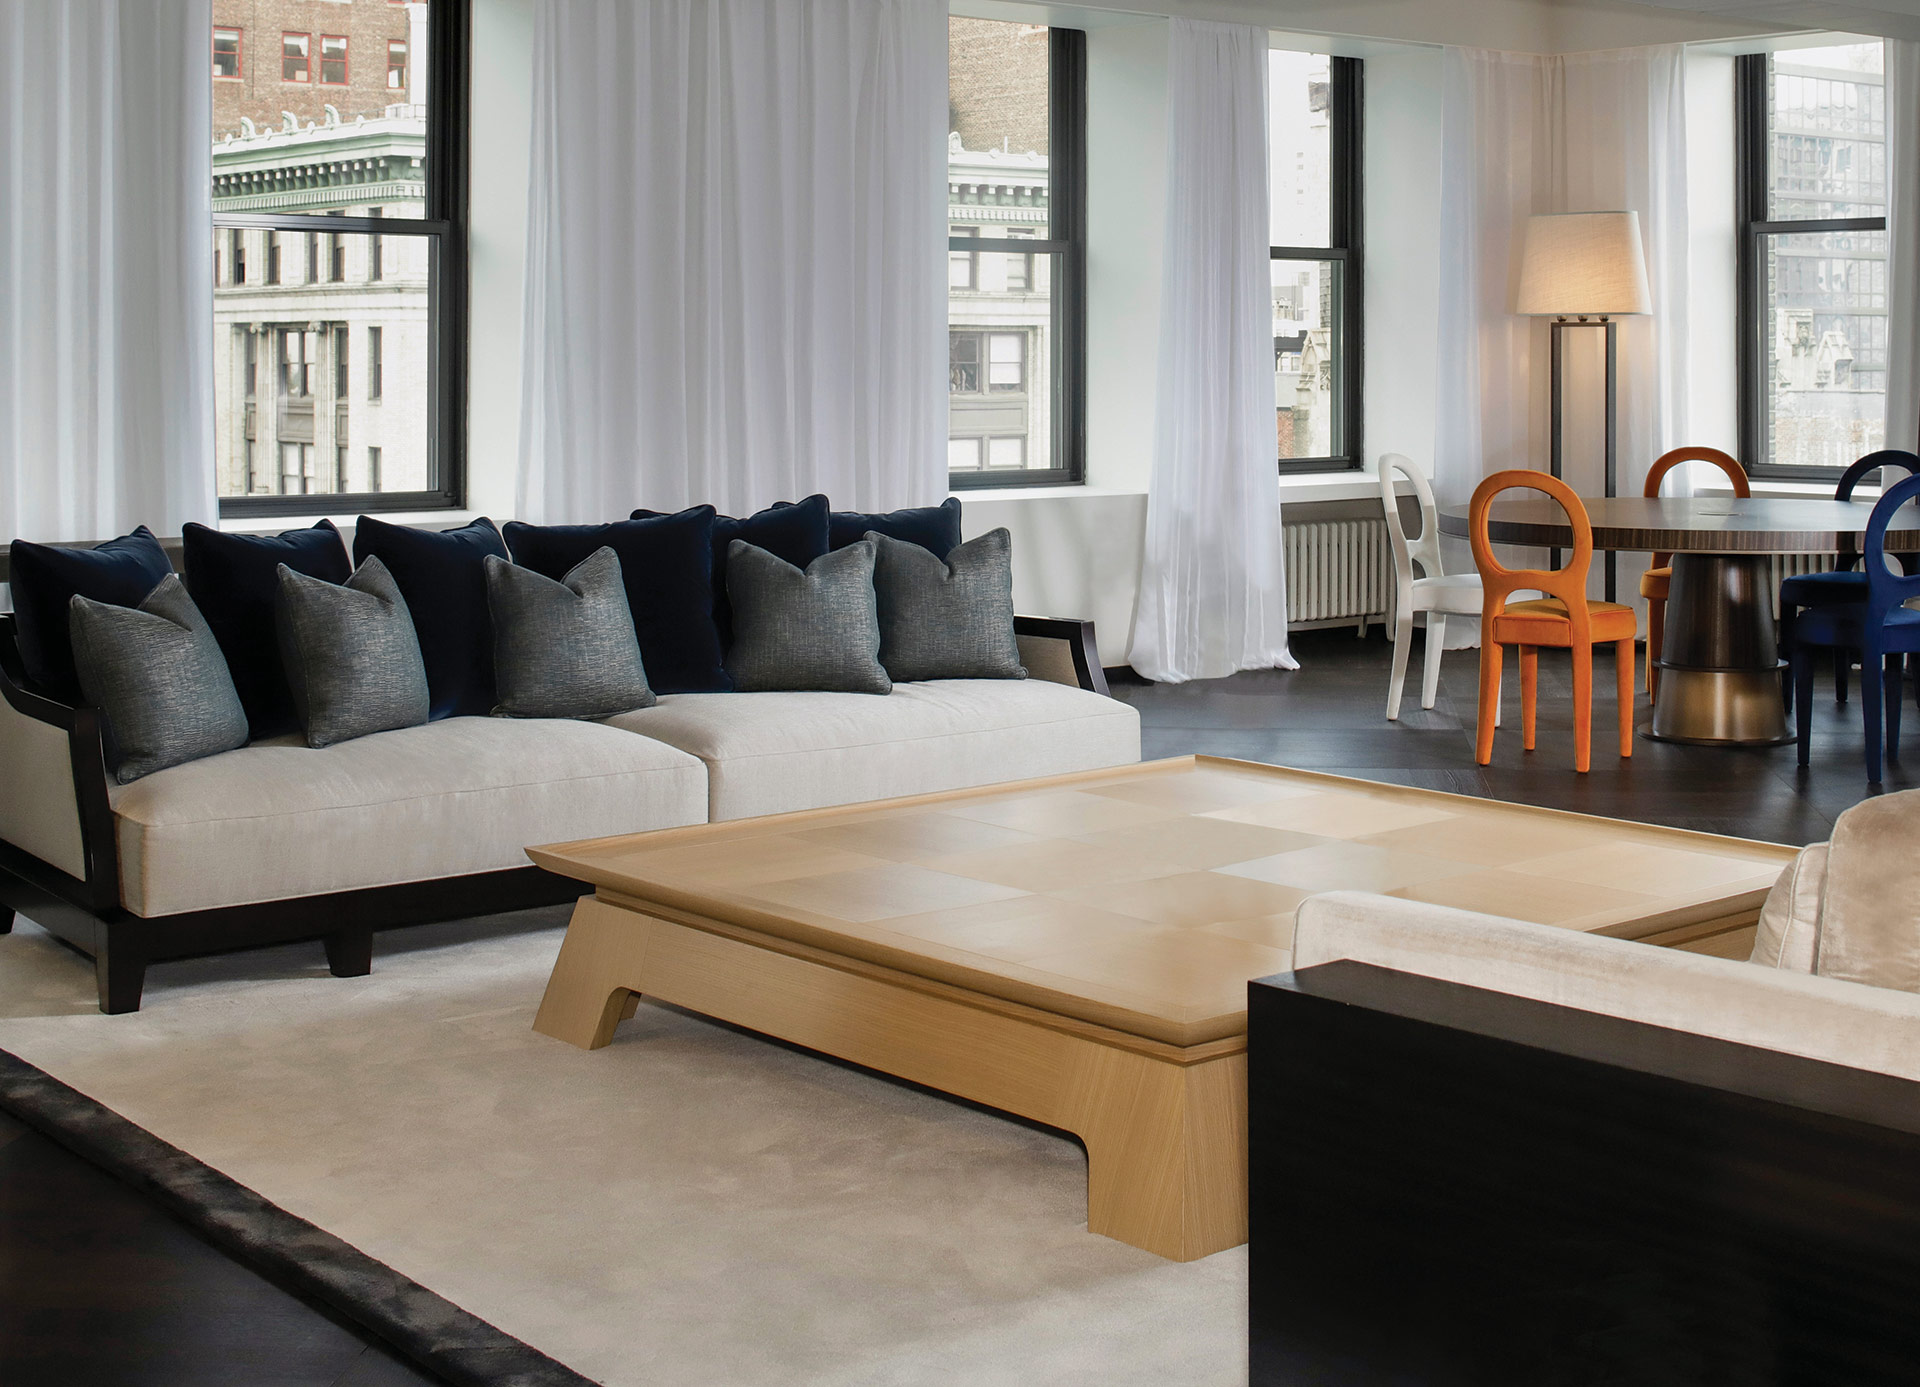 In 2019 the New York showroom moved to Madison Avenue at 32nd Street, located on the 17th floor right above design row and steps away from the Empire State Building.